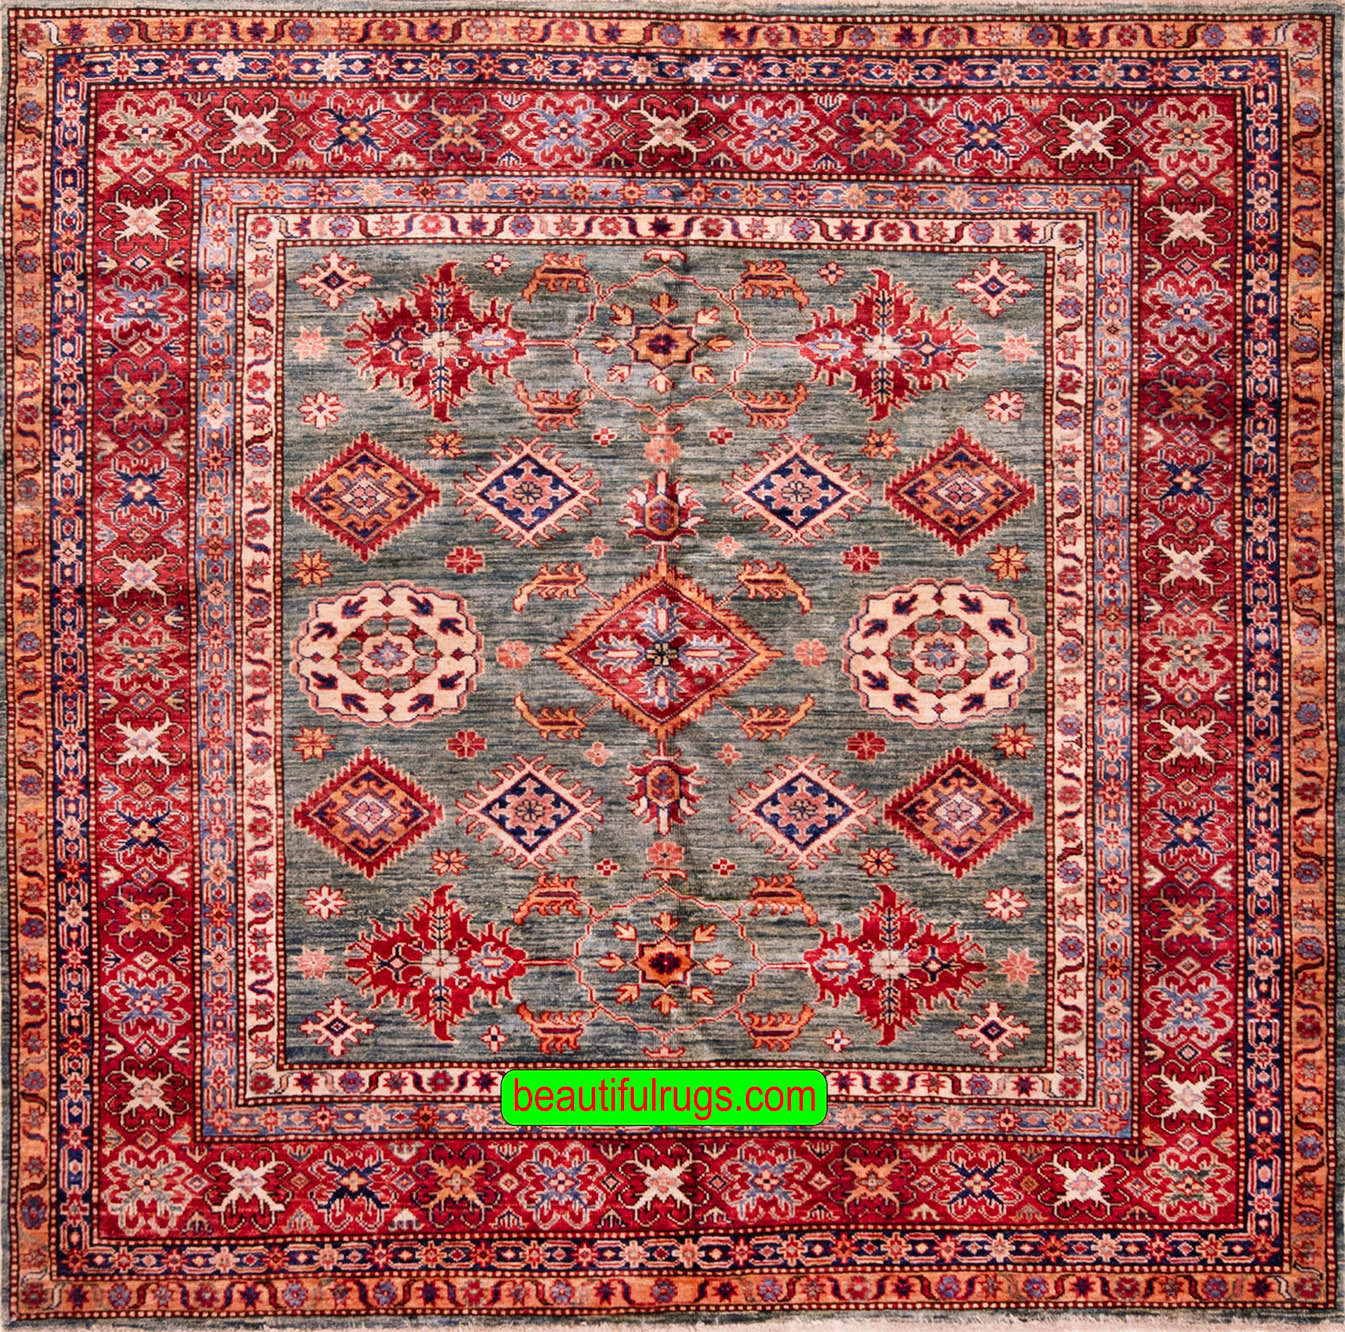 Handmade square rug, geometric Kazak design in green and red colors. Size 6x6.